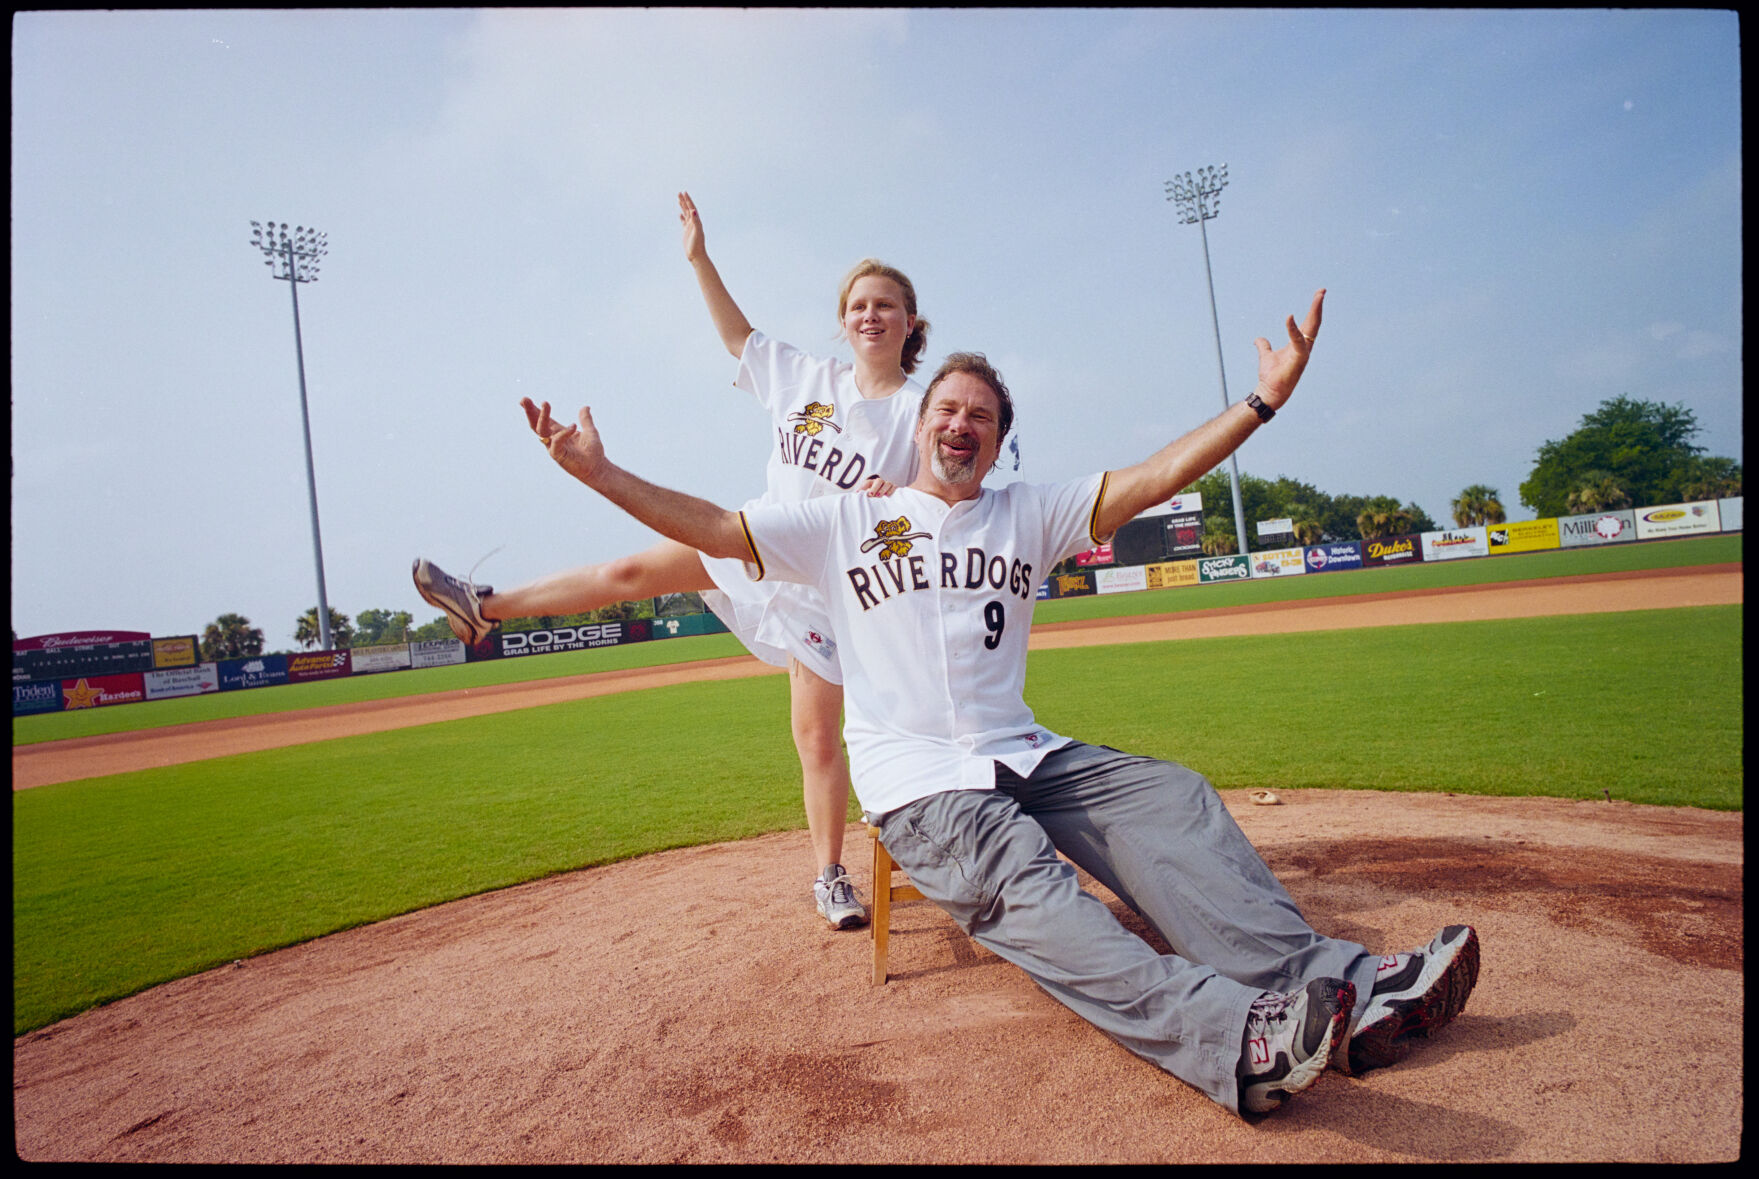 Sapakoff Netflix grabs doc on RiverDogs Mike Veeck and family